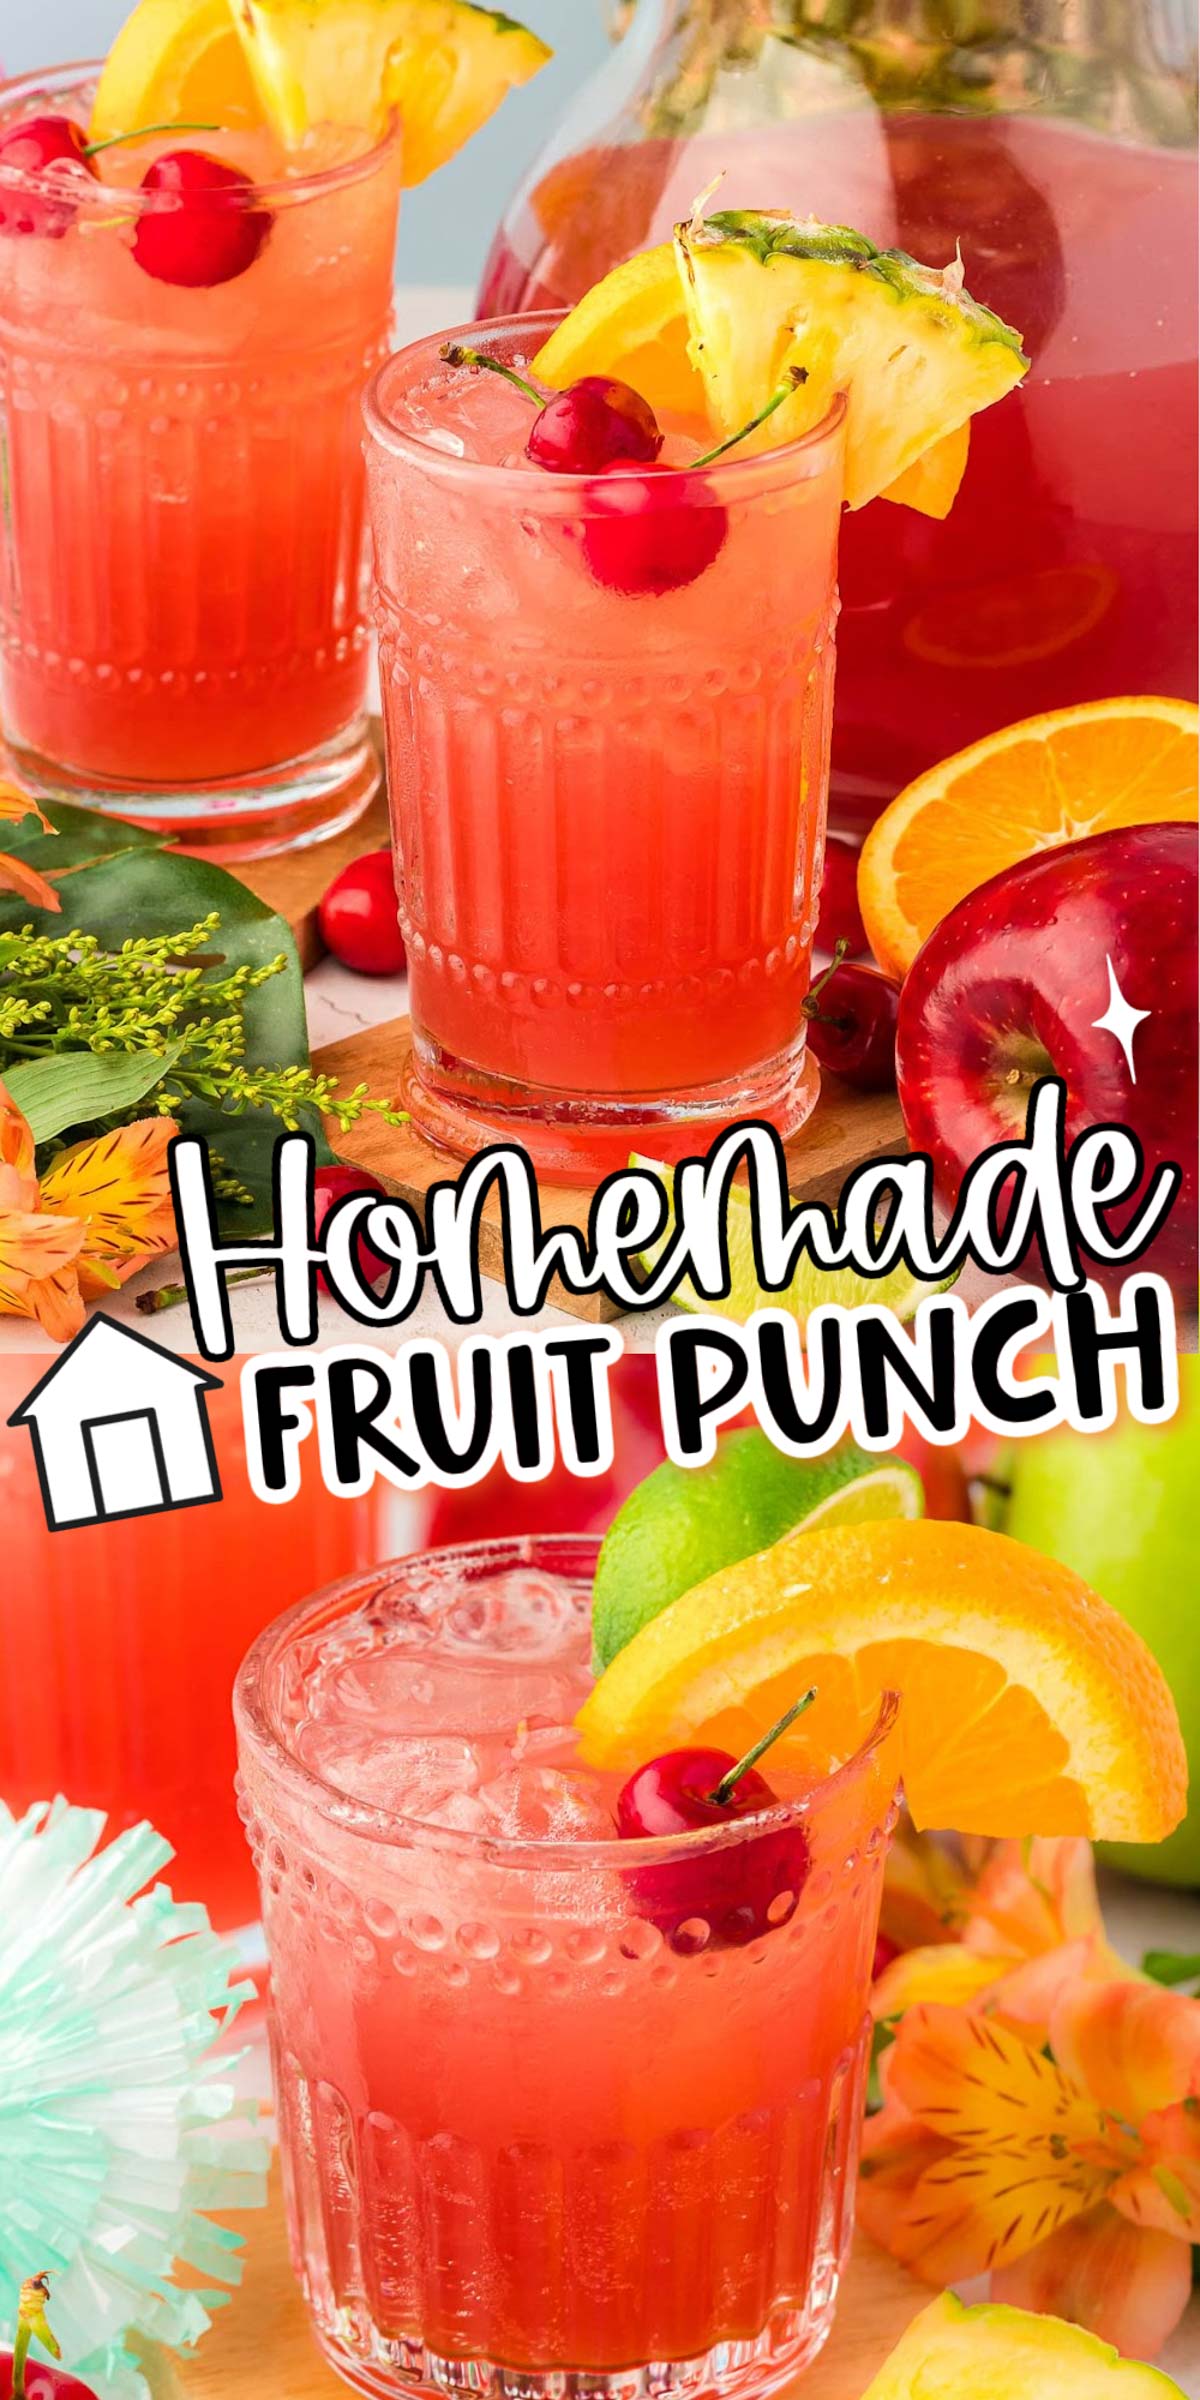 Learn How To Make Fruit Punch with the best high-quality ingredients to have the most delicious party drink at all of your gatherings! Prep a batch of this fruity, perfectly sweet punch in less than 5 minutes! via @sugarandsoulco